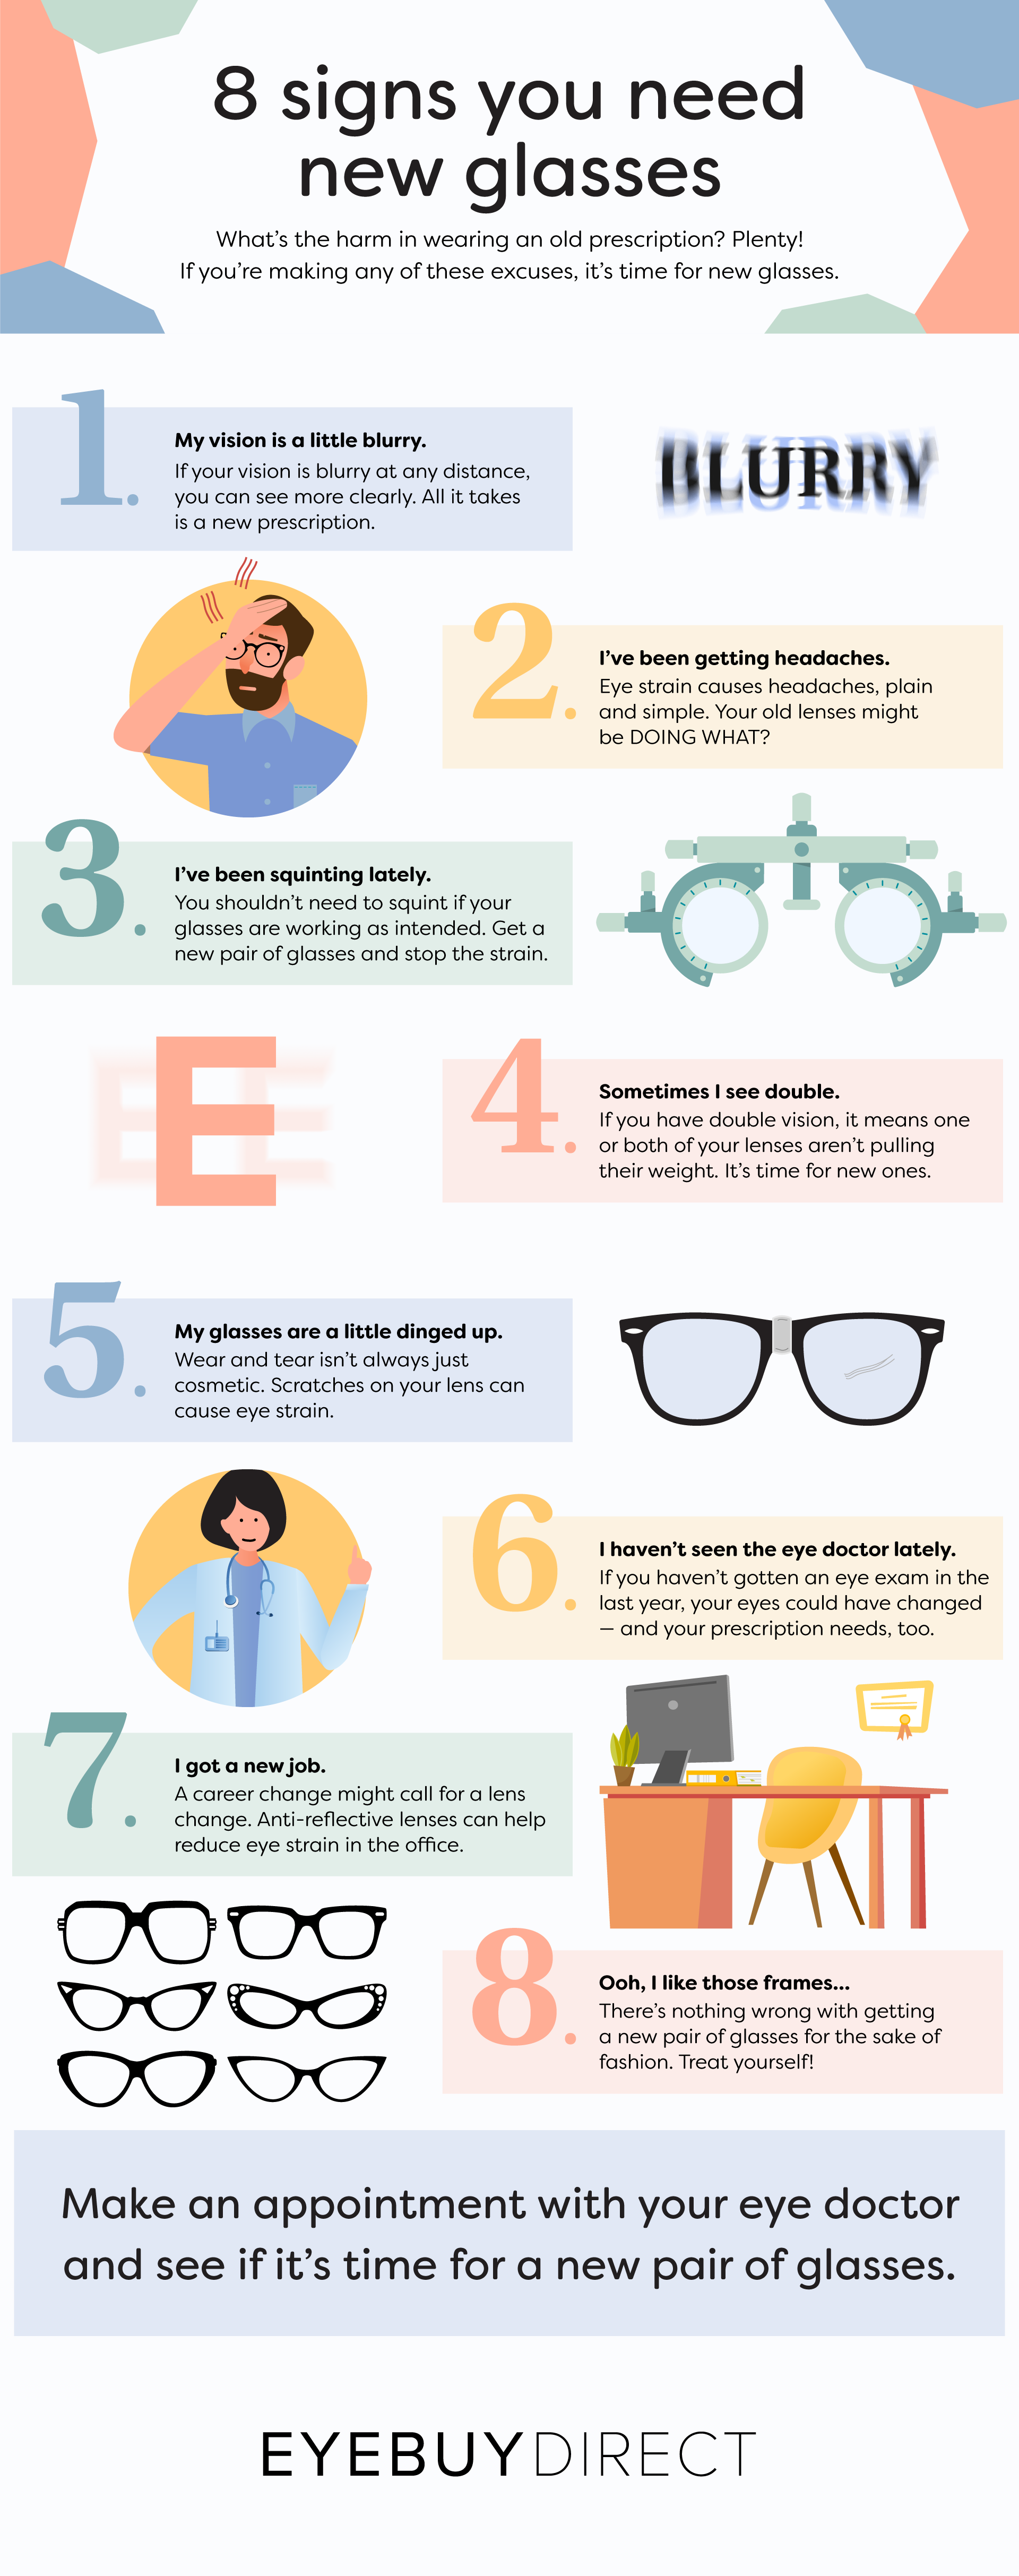 An infographic showing 8 signs that you need new glasses